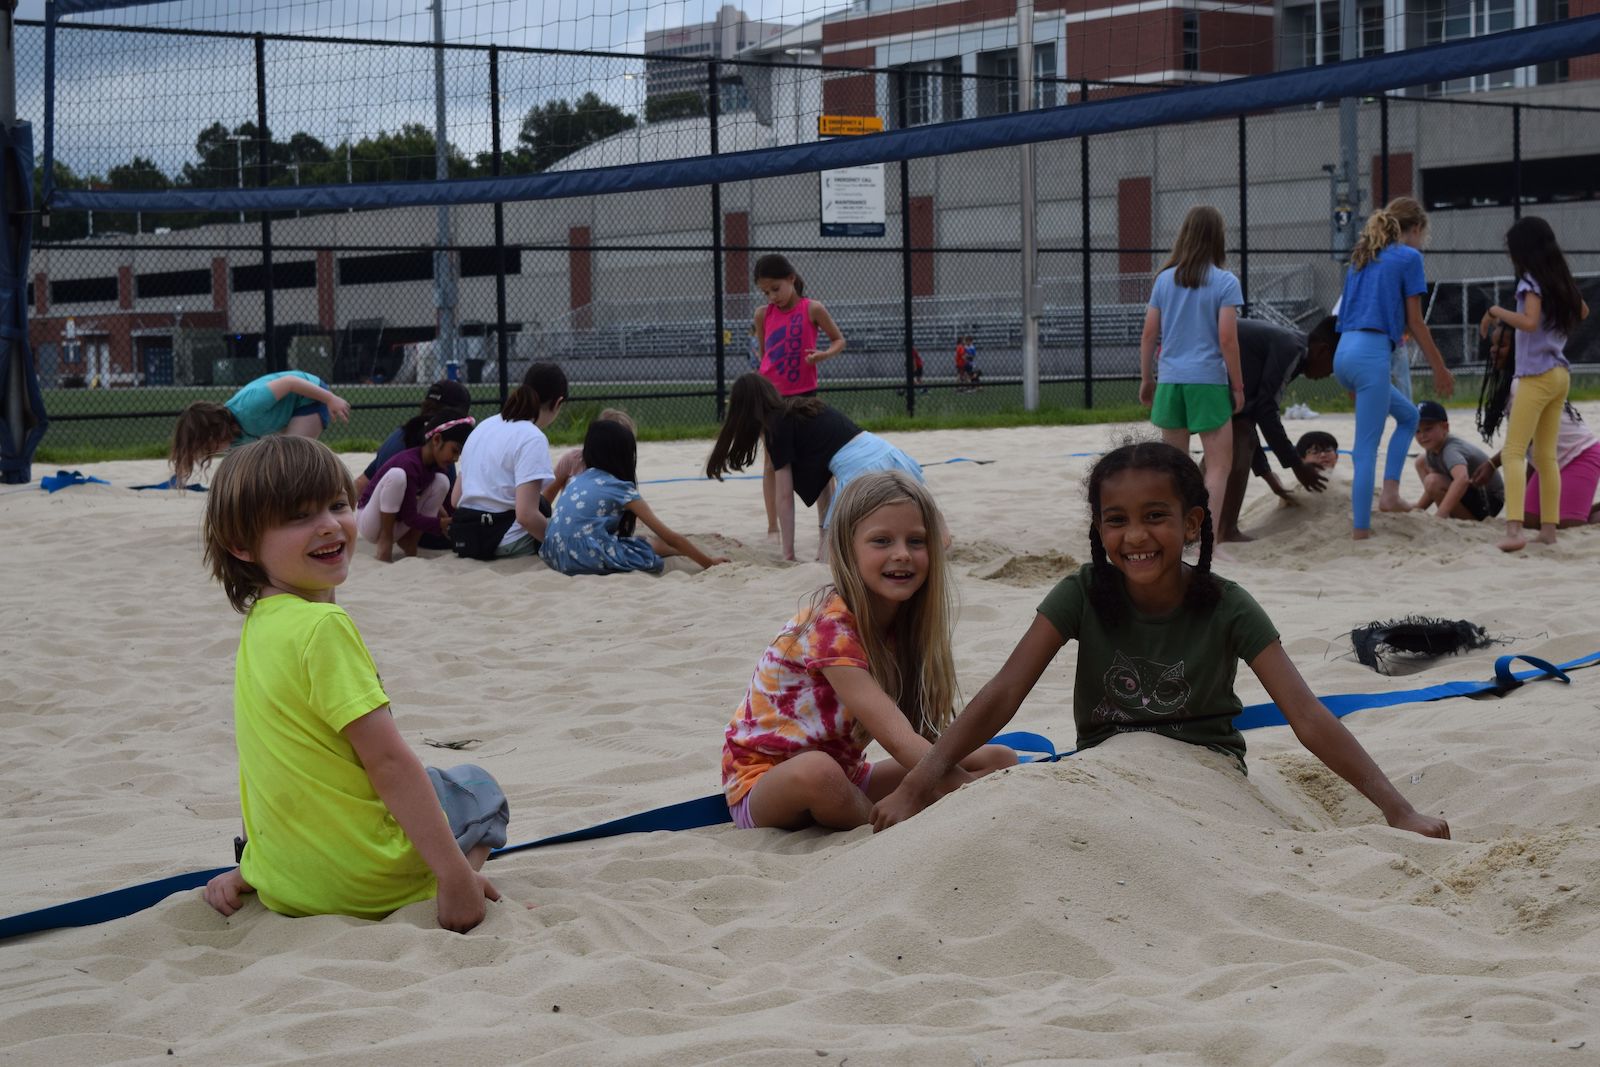 Tech Wreck campers playing in the sand.